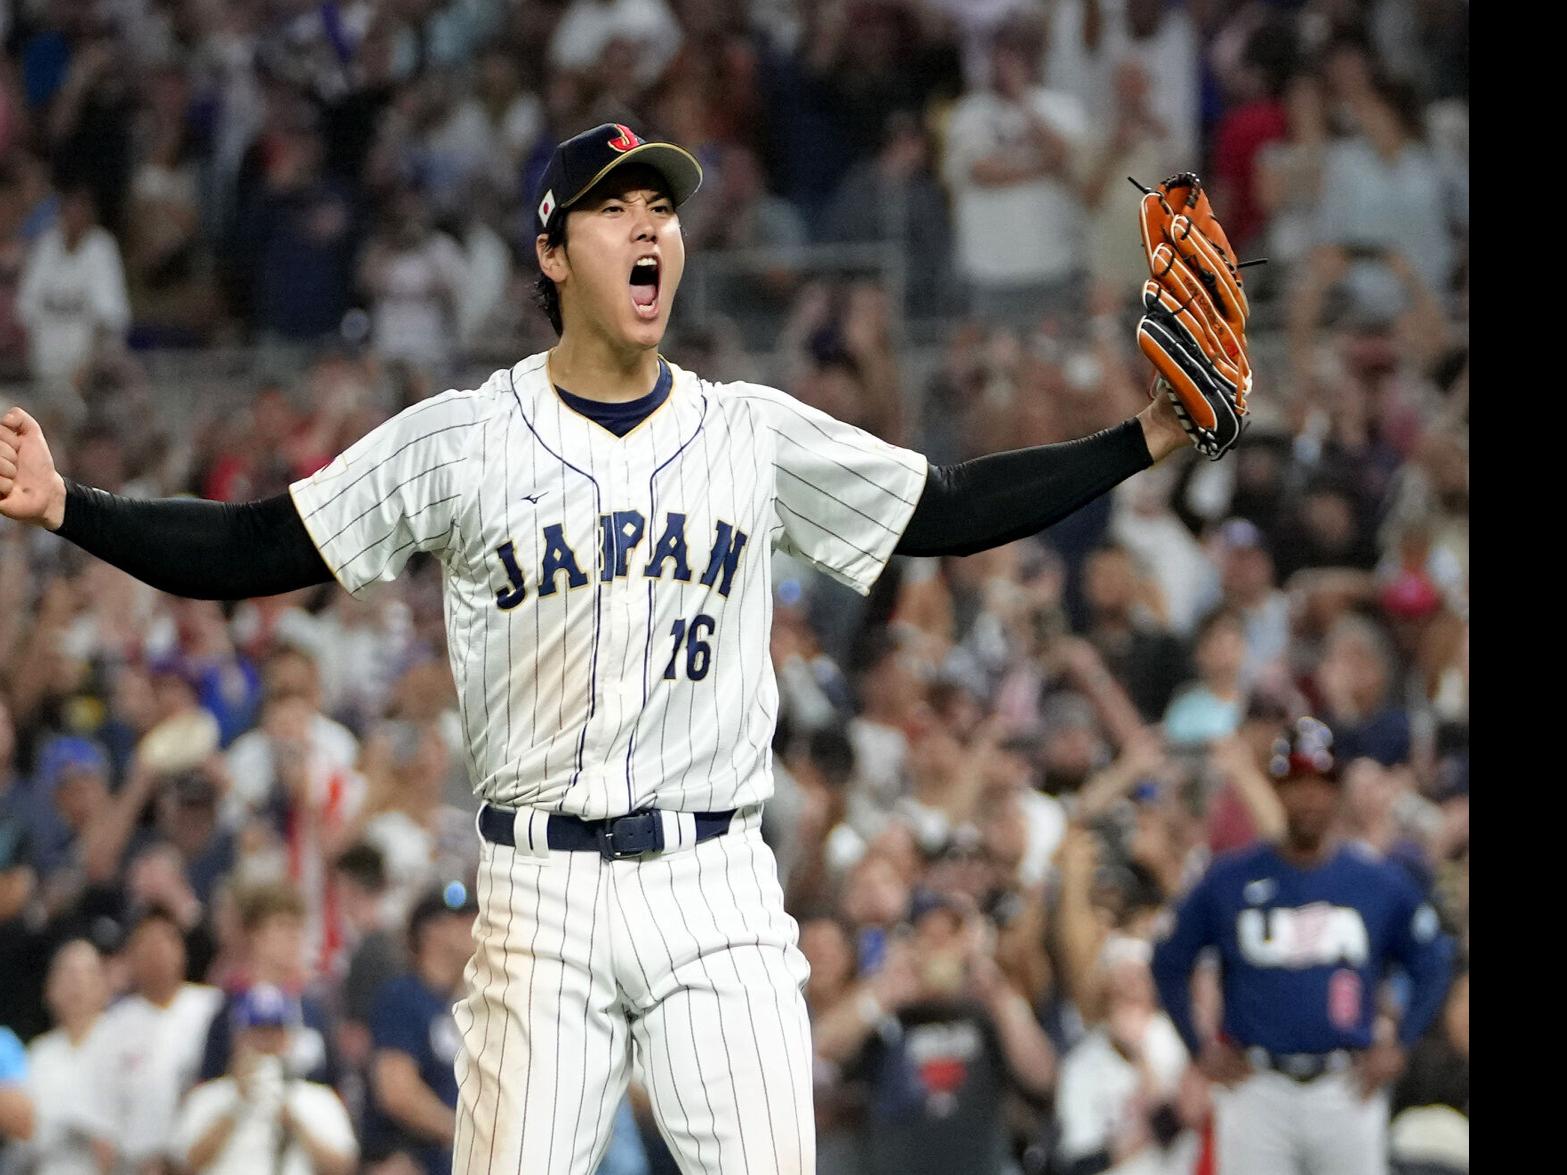 Sayonara! U.S. ousted by Japan in WBC - Deseret News